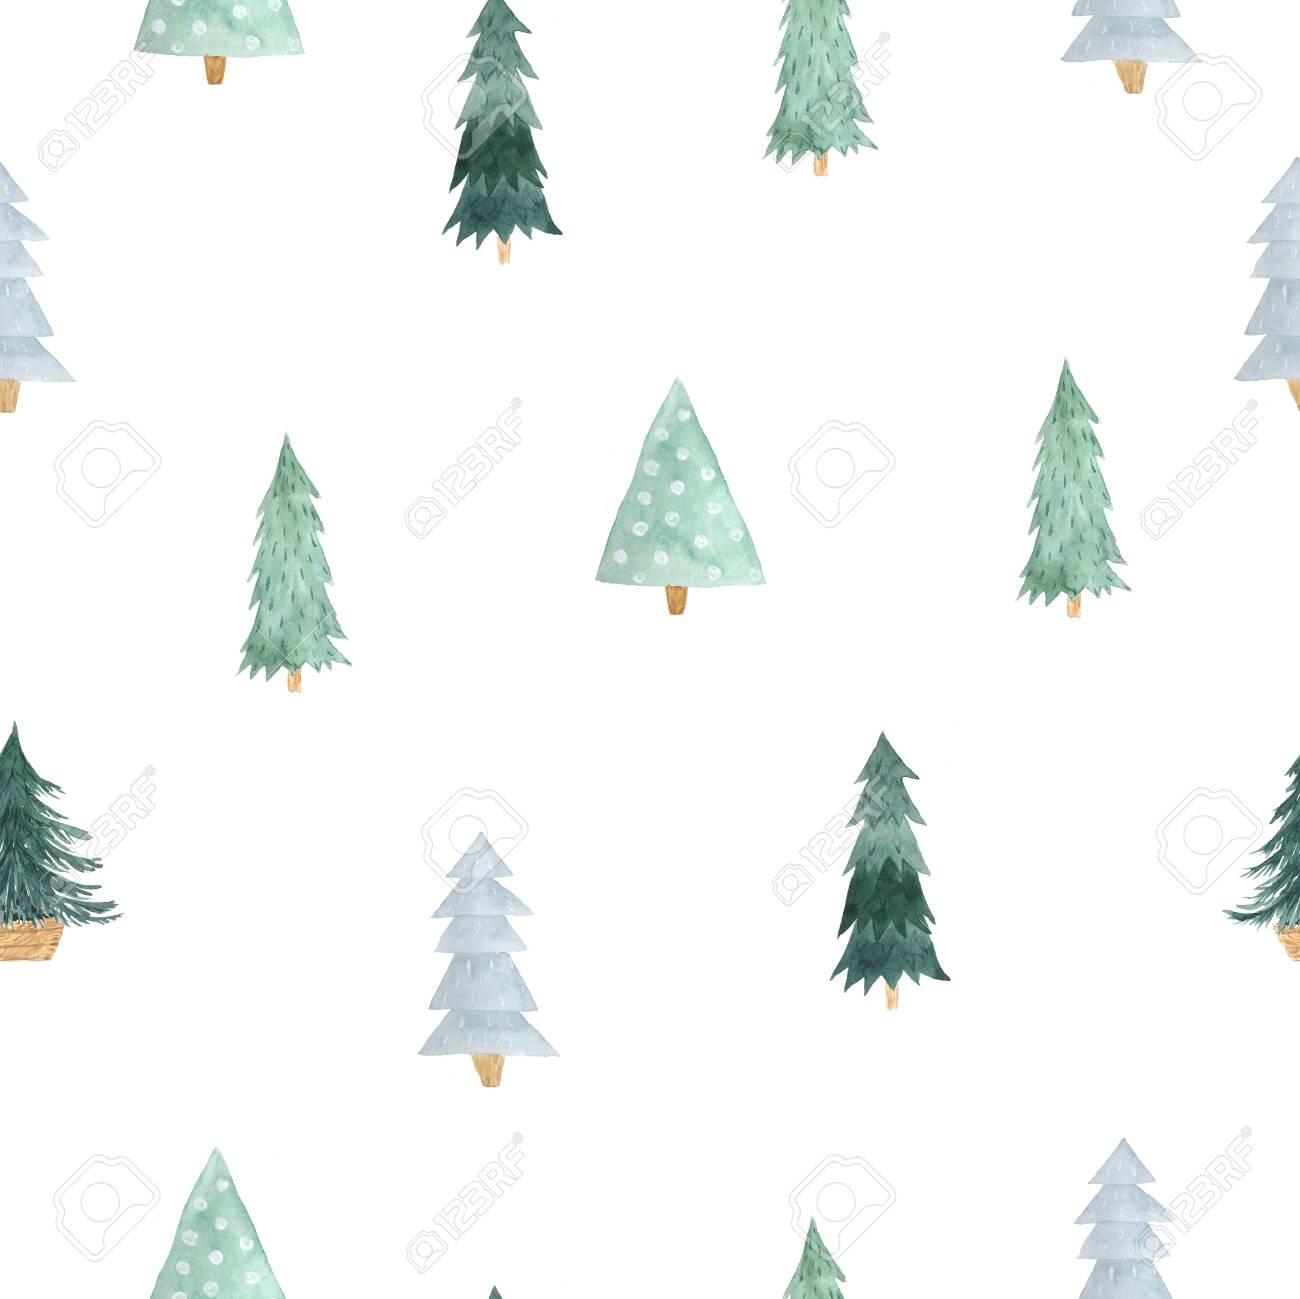 Seamless Pattern With Bright Green Christmas Tree Decorative